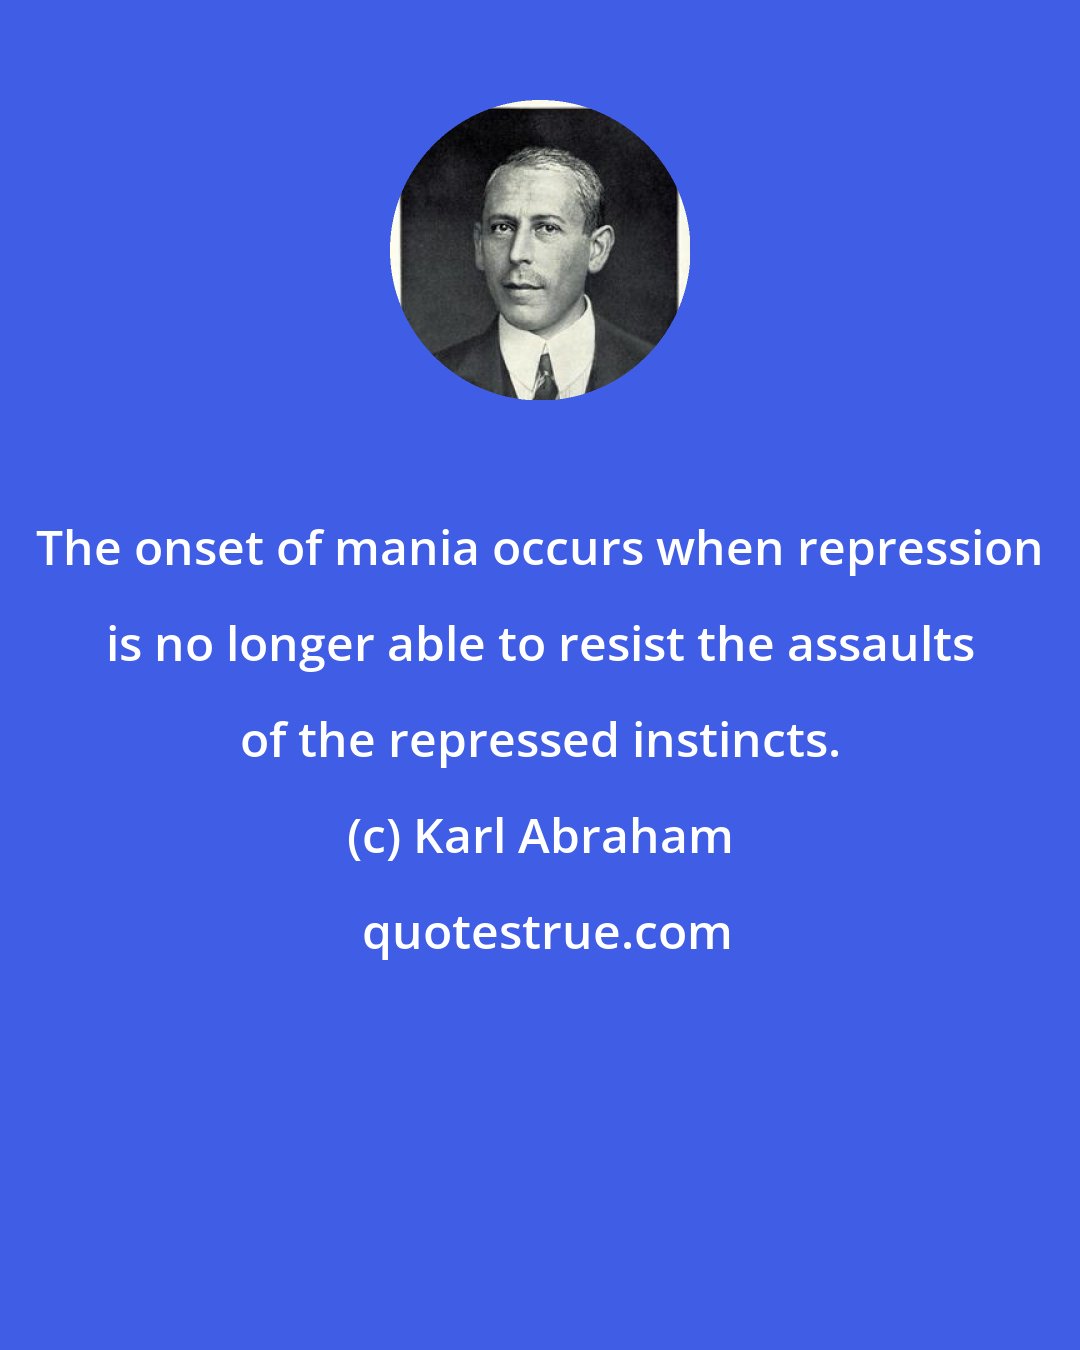 Karl Abraham: The onset of mania occurs when repression is no longer able to resist the assaults of the repressed instincts.